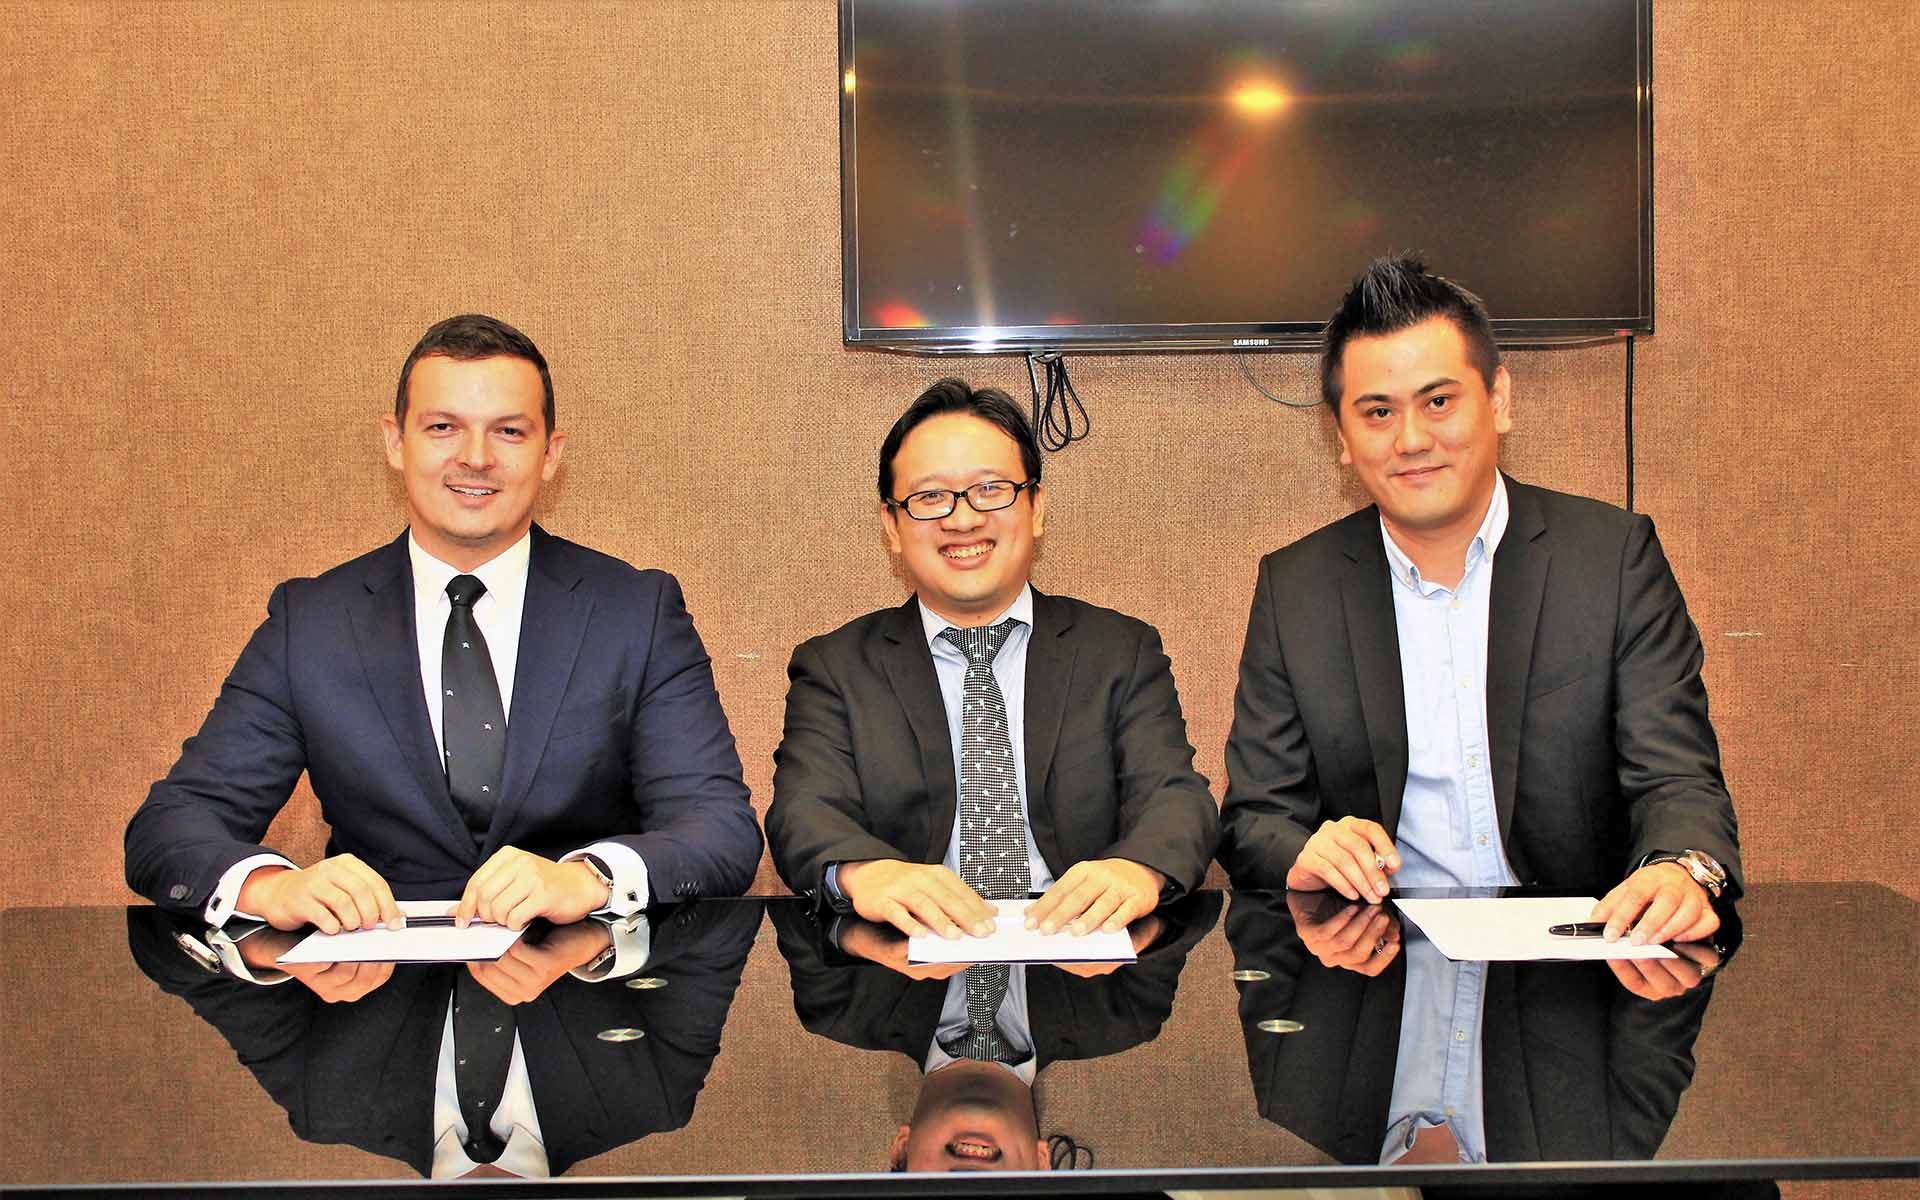 Swiss Blockchain Sophiatx Rolls out Expansion to Asia by Joining Forces with Cheng & Co